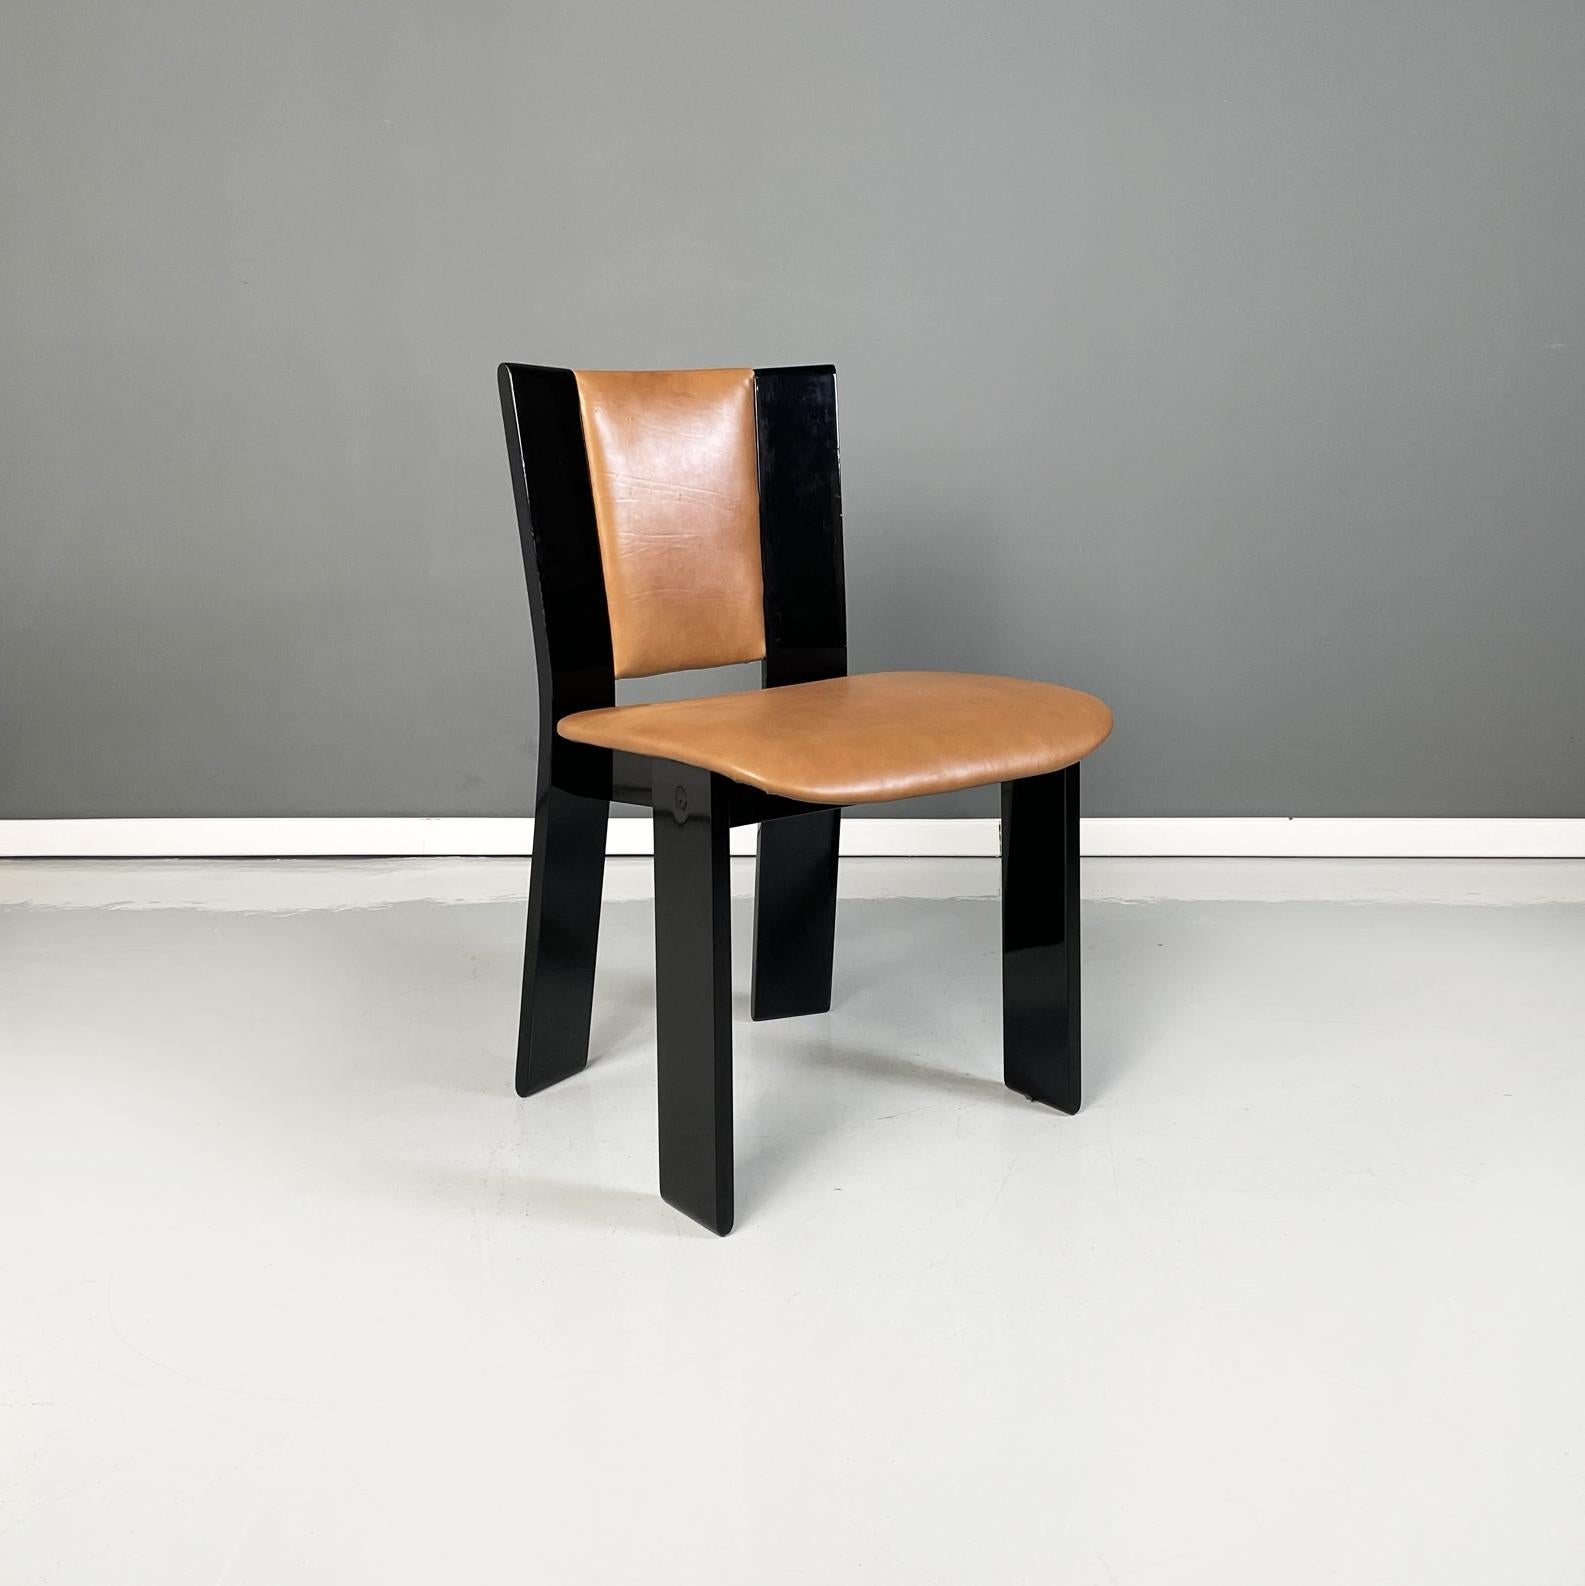 Italian modern black lacquered brown leather Chairs Acerbis International, 1980s
Set of four chairs in brown leather and black lacquered wood. The backrest is made up of two side bands in lacquered wood and a central one in lightly padded leather.